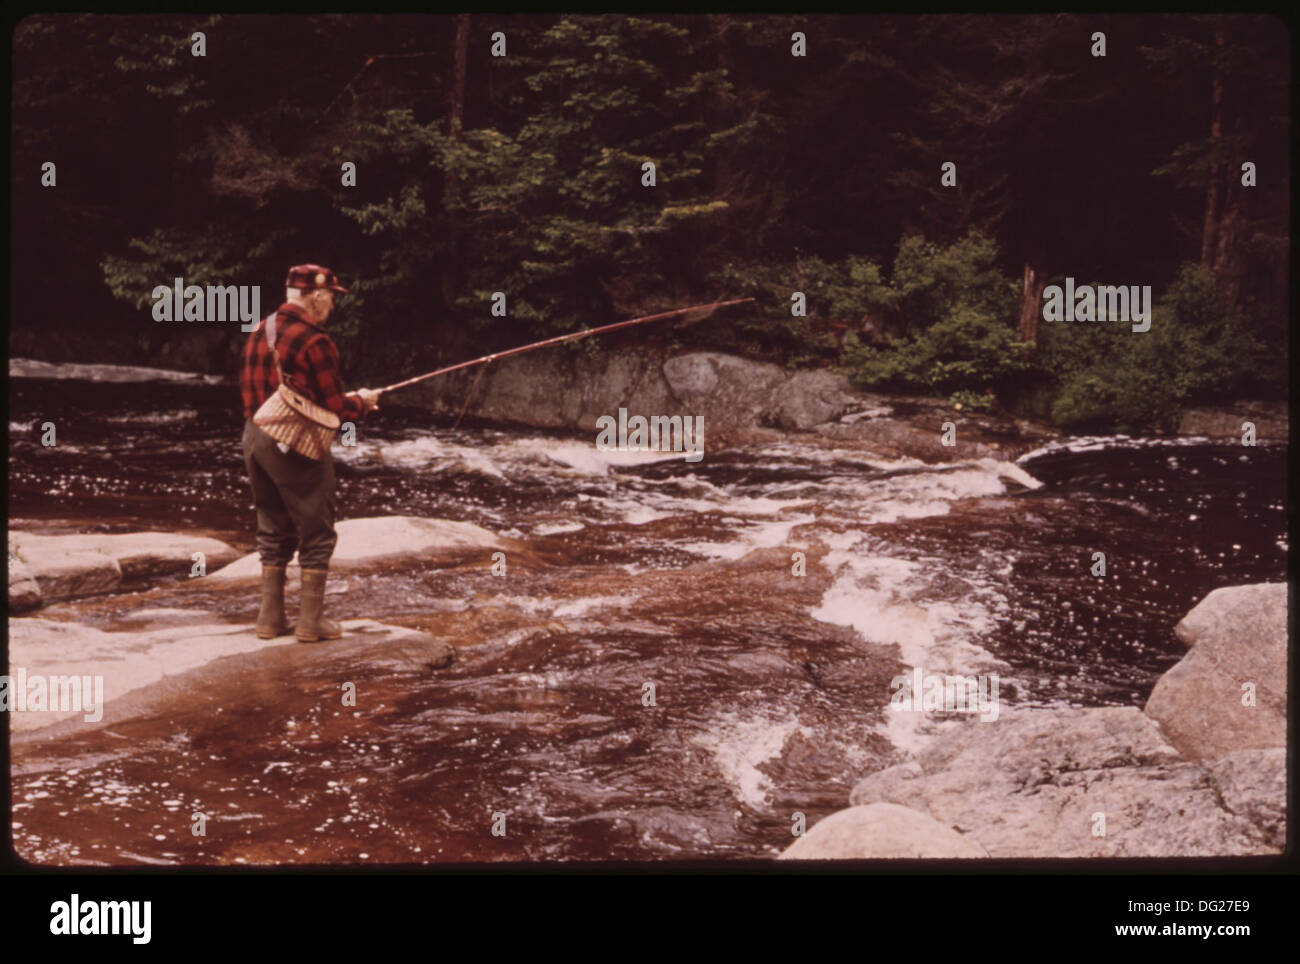 TROUT FISHERMAN FISHING ON TWITCHELL CREEK NEAR BIG MOOSE NEW YORK, IN THE ADIRONDACK FOREST PRESERVE 554520 Landscape Stock Photo